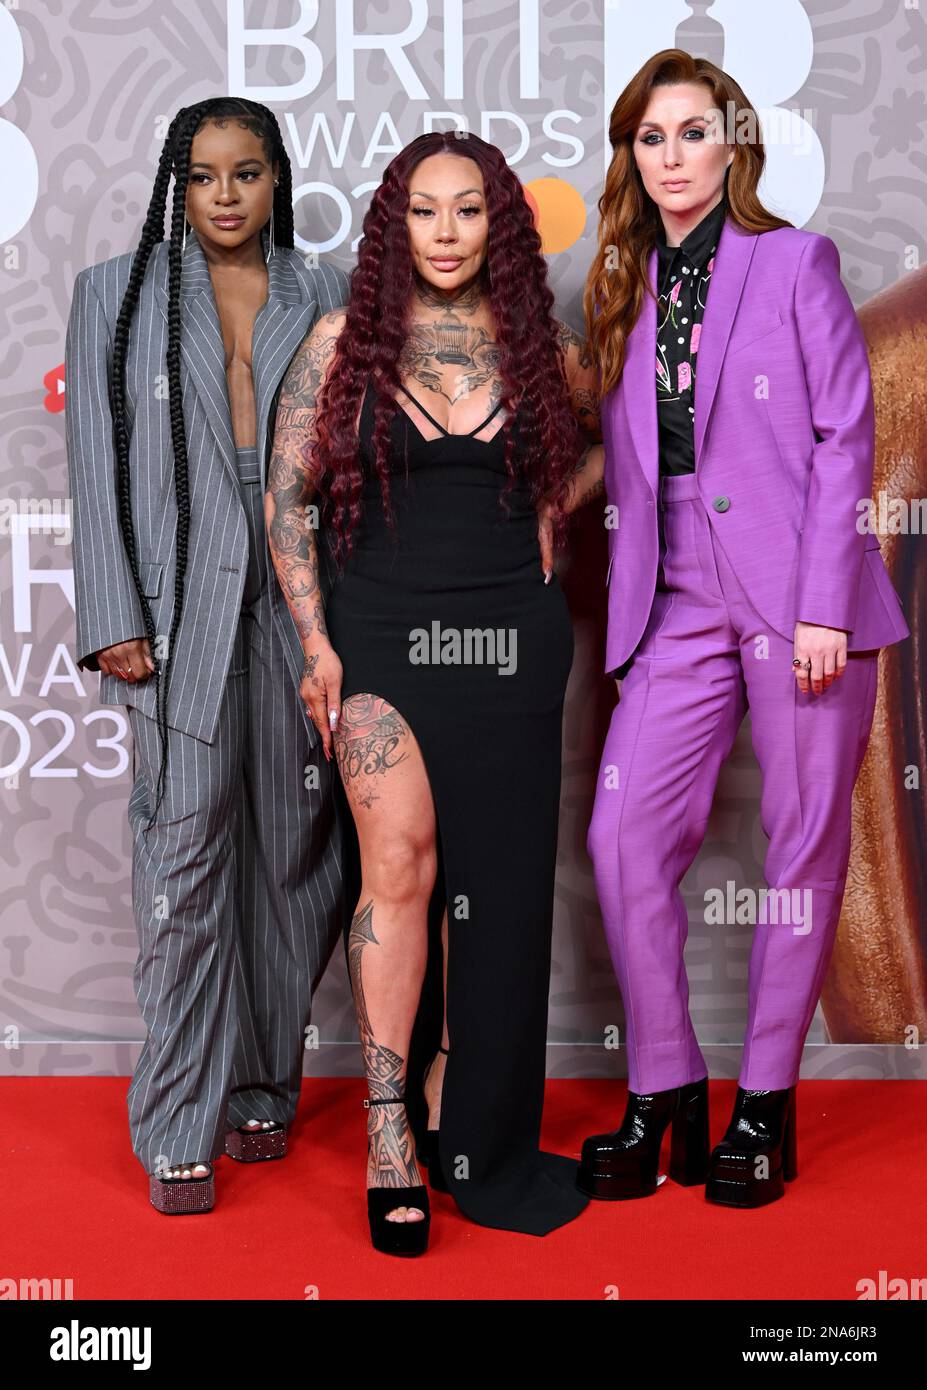 EDITORIAL USE ONLY - Keisha Buchanan, Mutya Buena and Siobhan Donaghy from the Sugababes at the 2023 Brit Awards, on February 11, 2023 in London, UK. Photo by Stuart Hardy/ABACAPRESS.COM Stock Photo